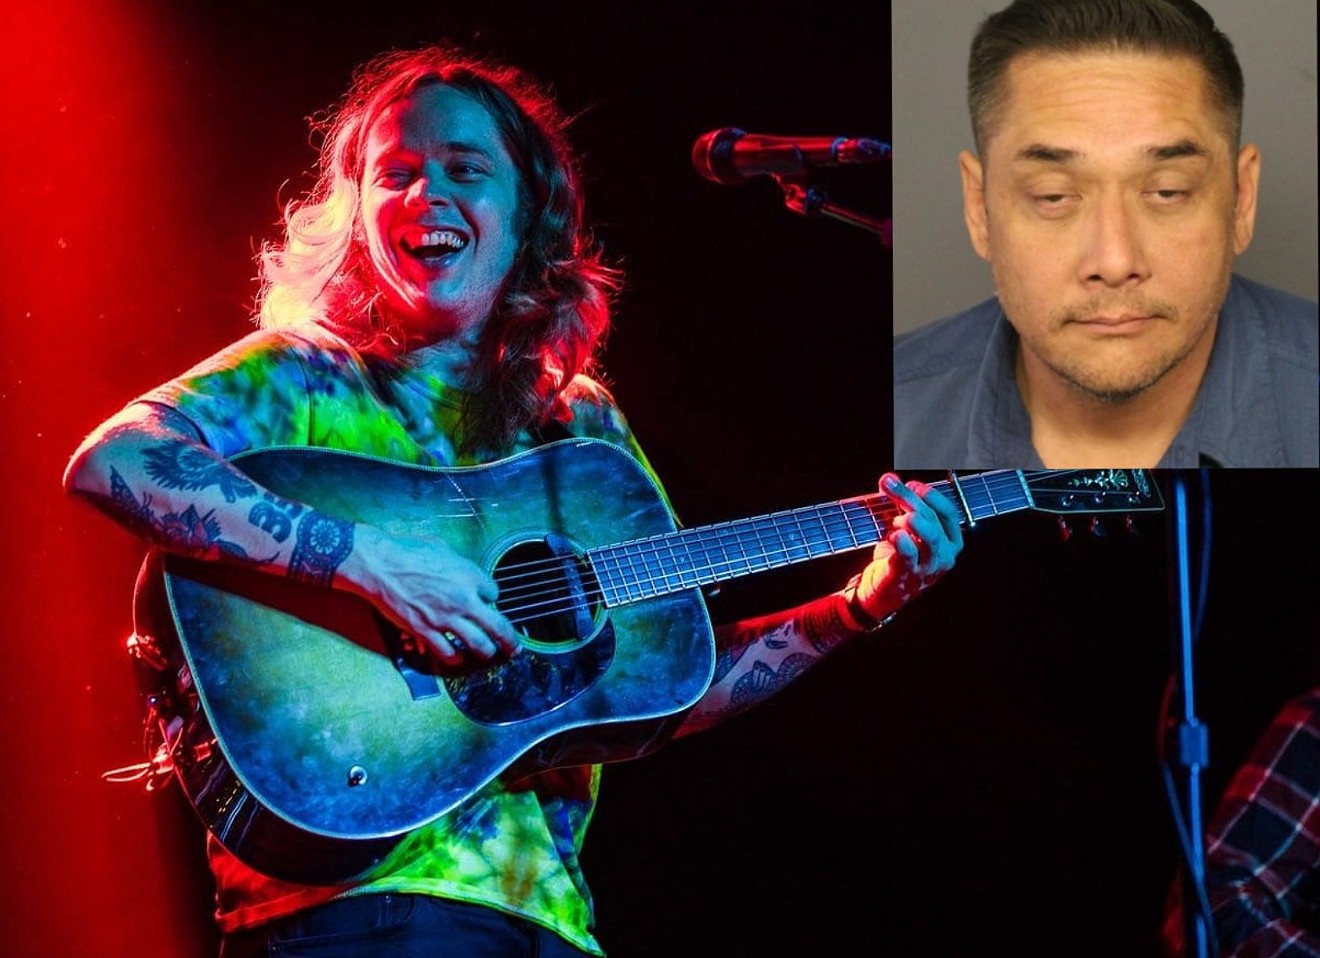 Billy Strings, real name William Lee Apostol, and Denver murder suspect Patrick Apostol both had the same dad, Billy, who died of a heroin overdose.